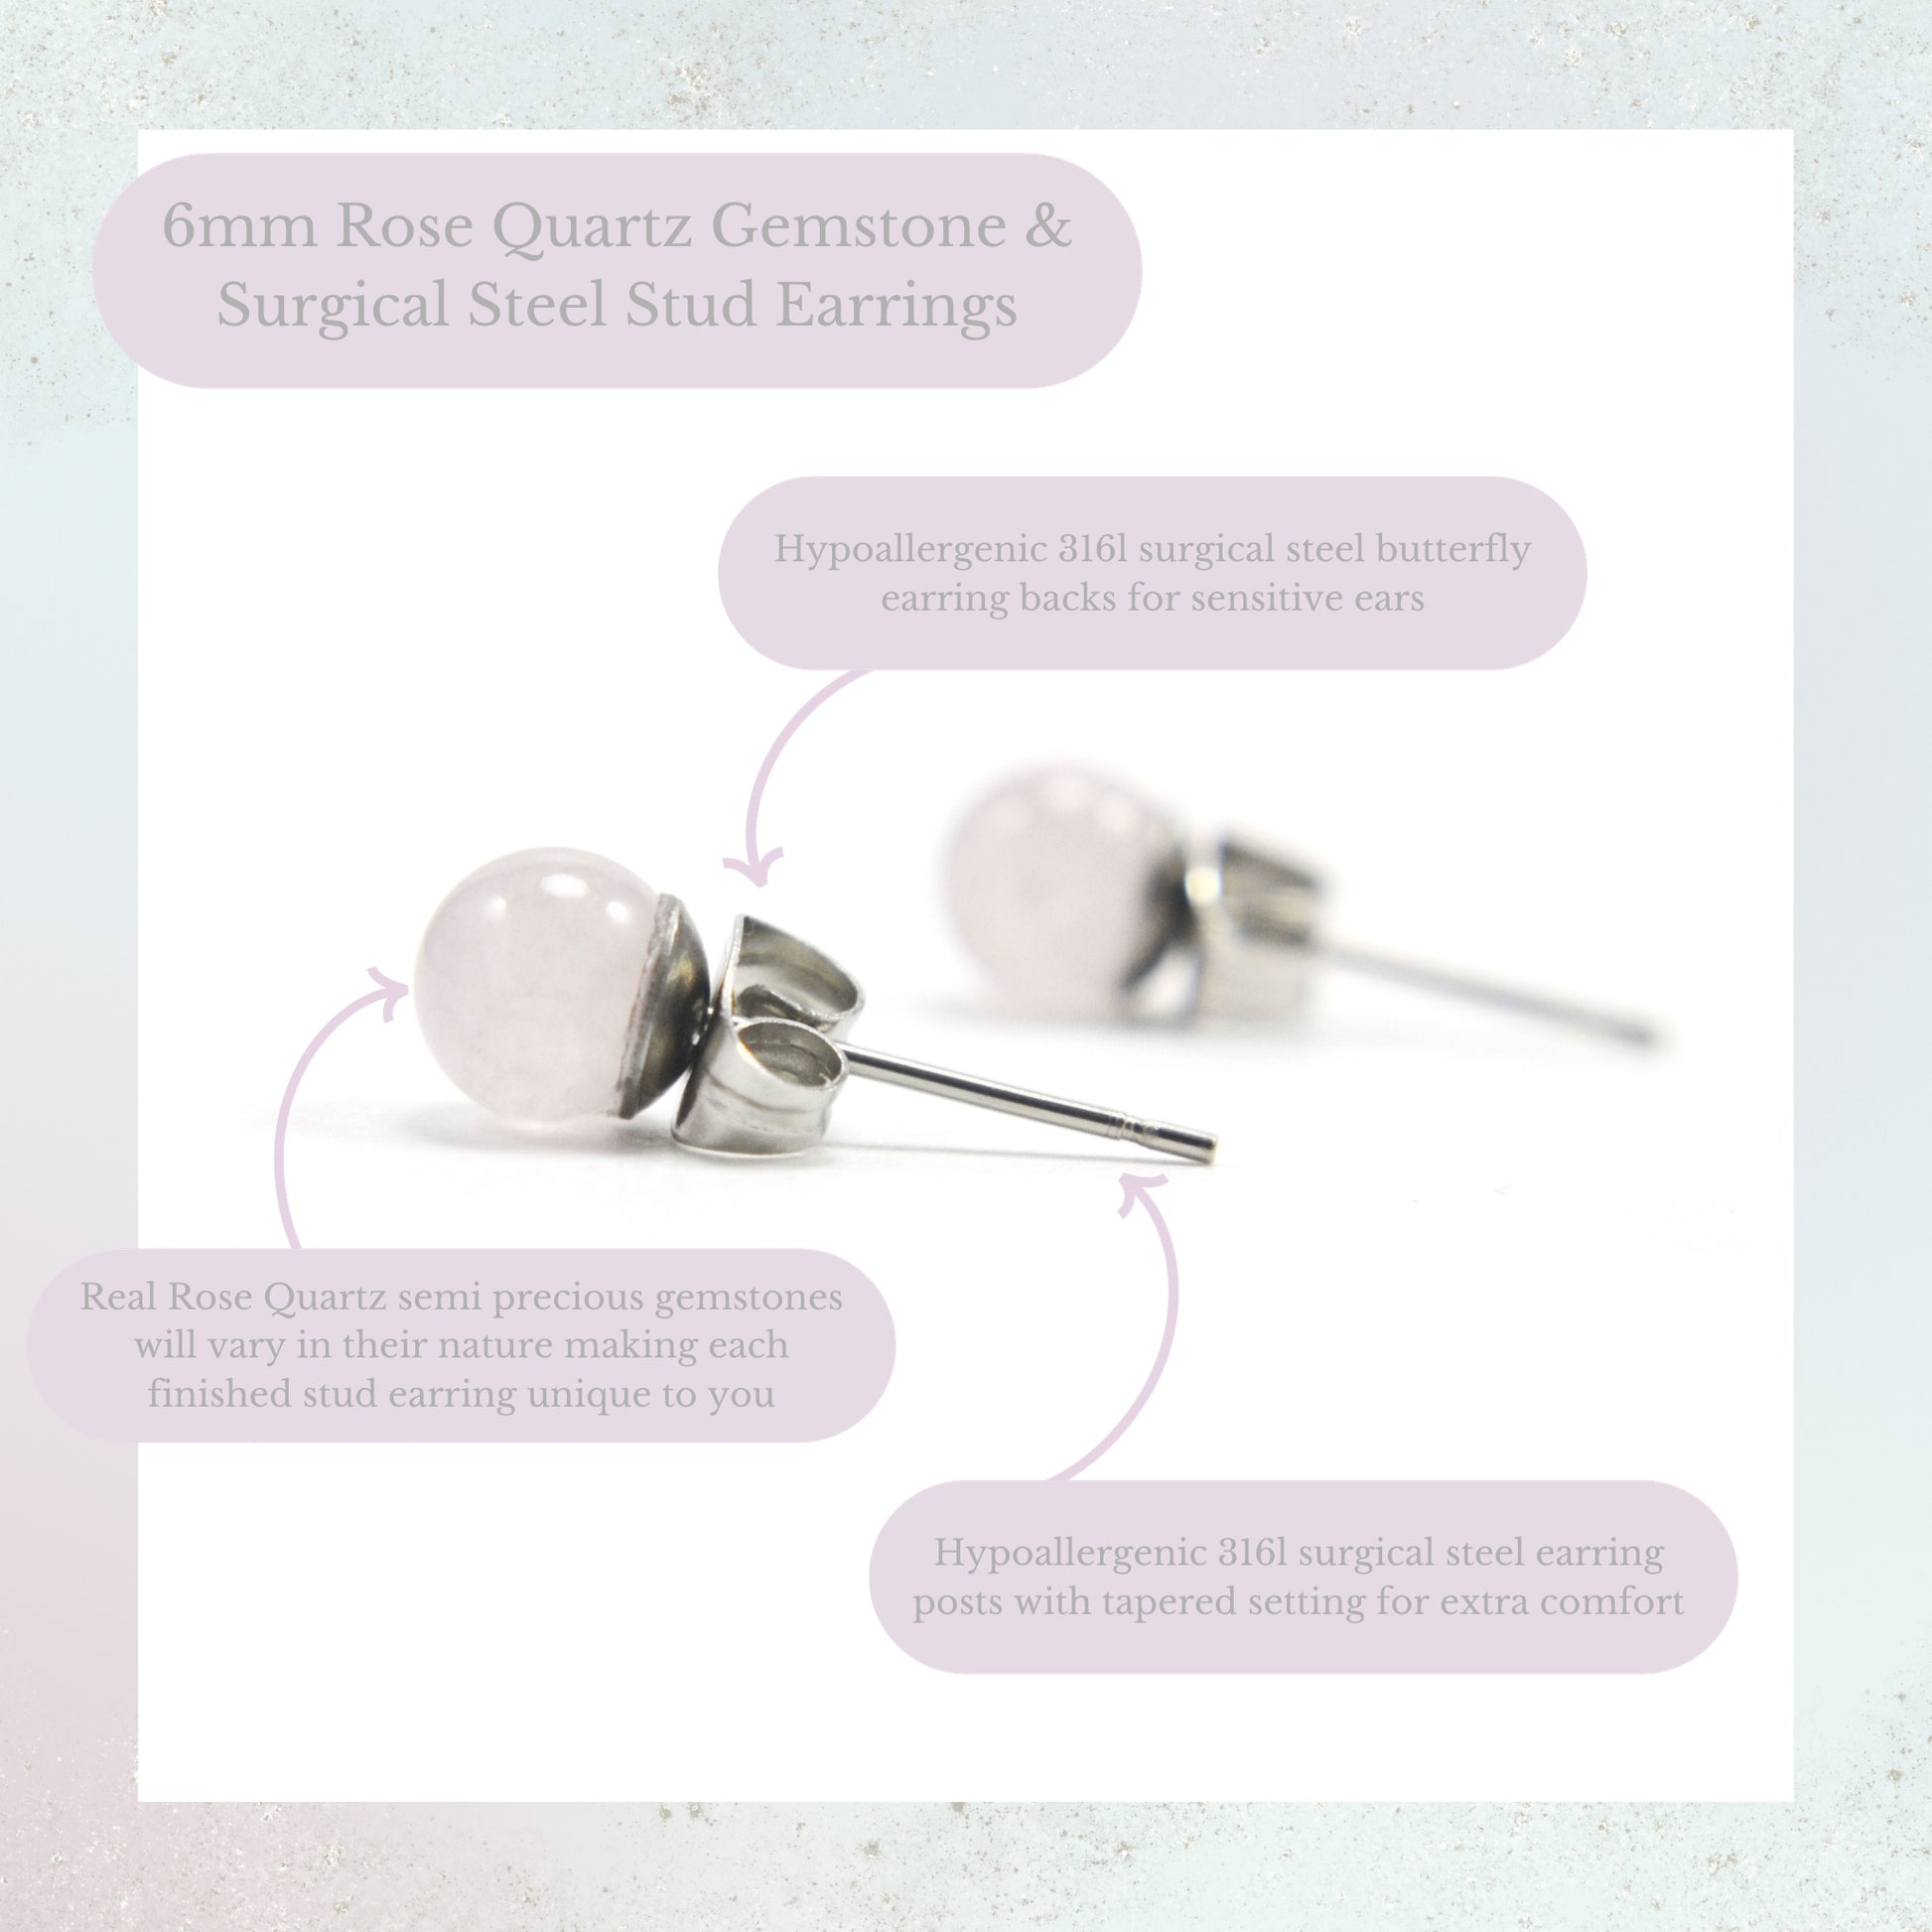 6mm Rose Quartz Gemstone & Surgical Steel Stud Earrings Product Information Graphic